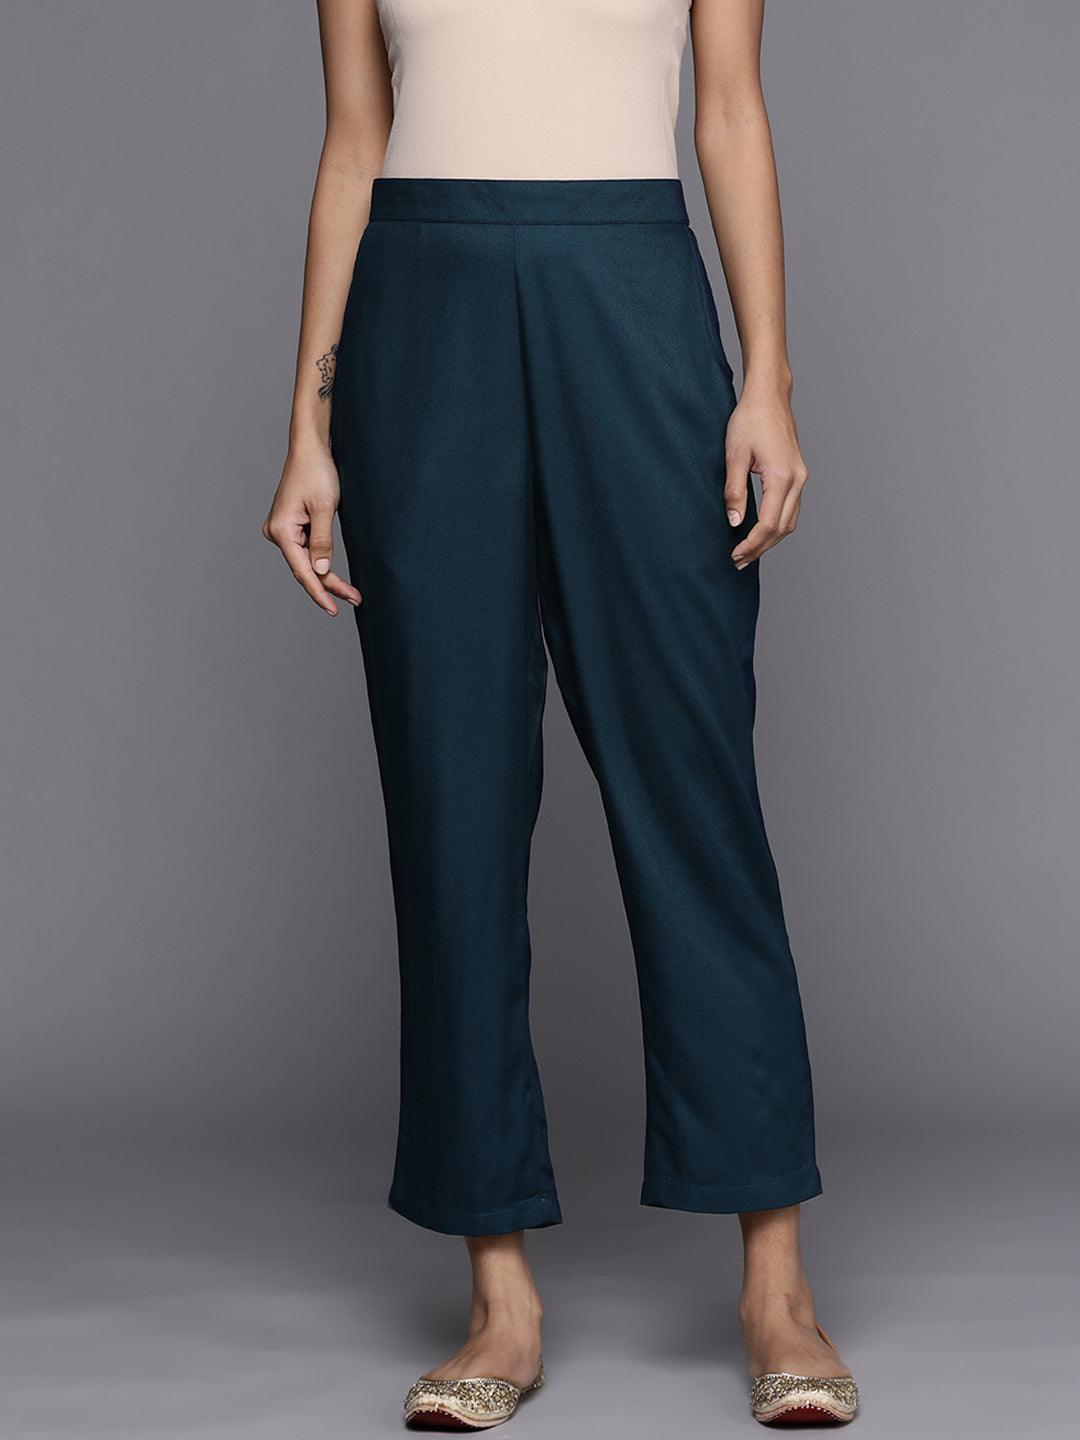 Blue Solid Pashmina Wool Trousers - Libas